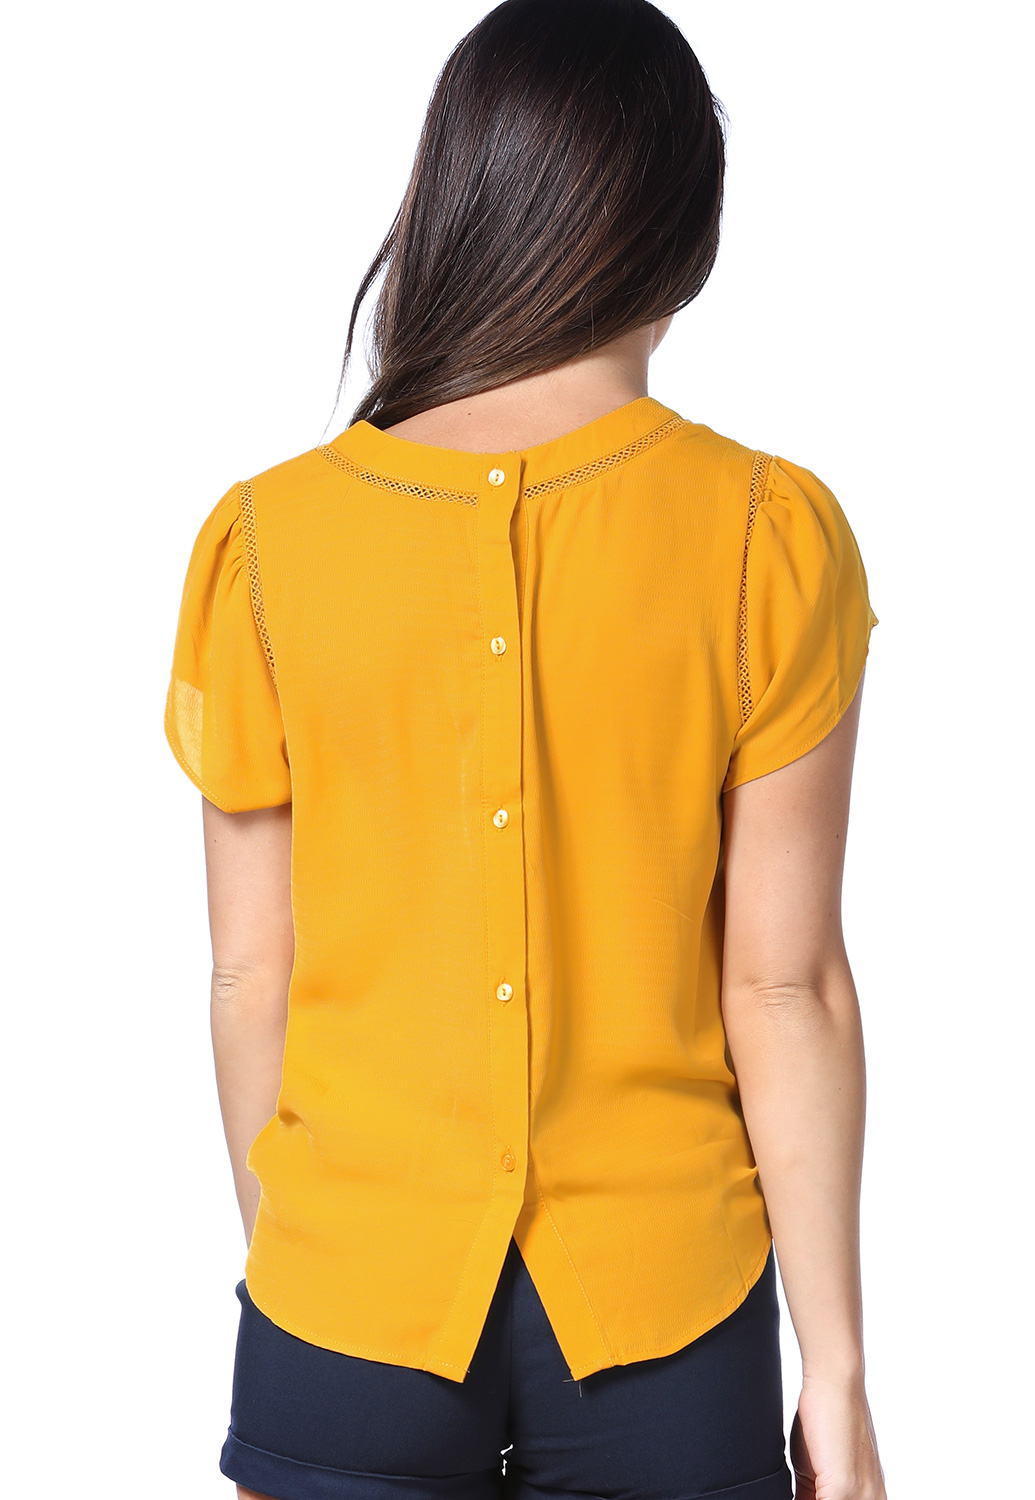 Back Button Up Dressy Top